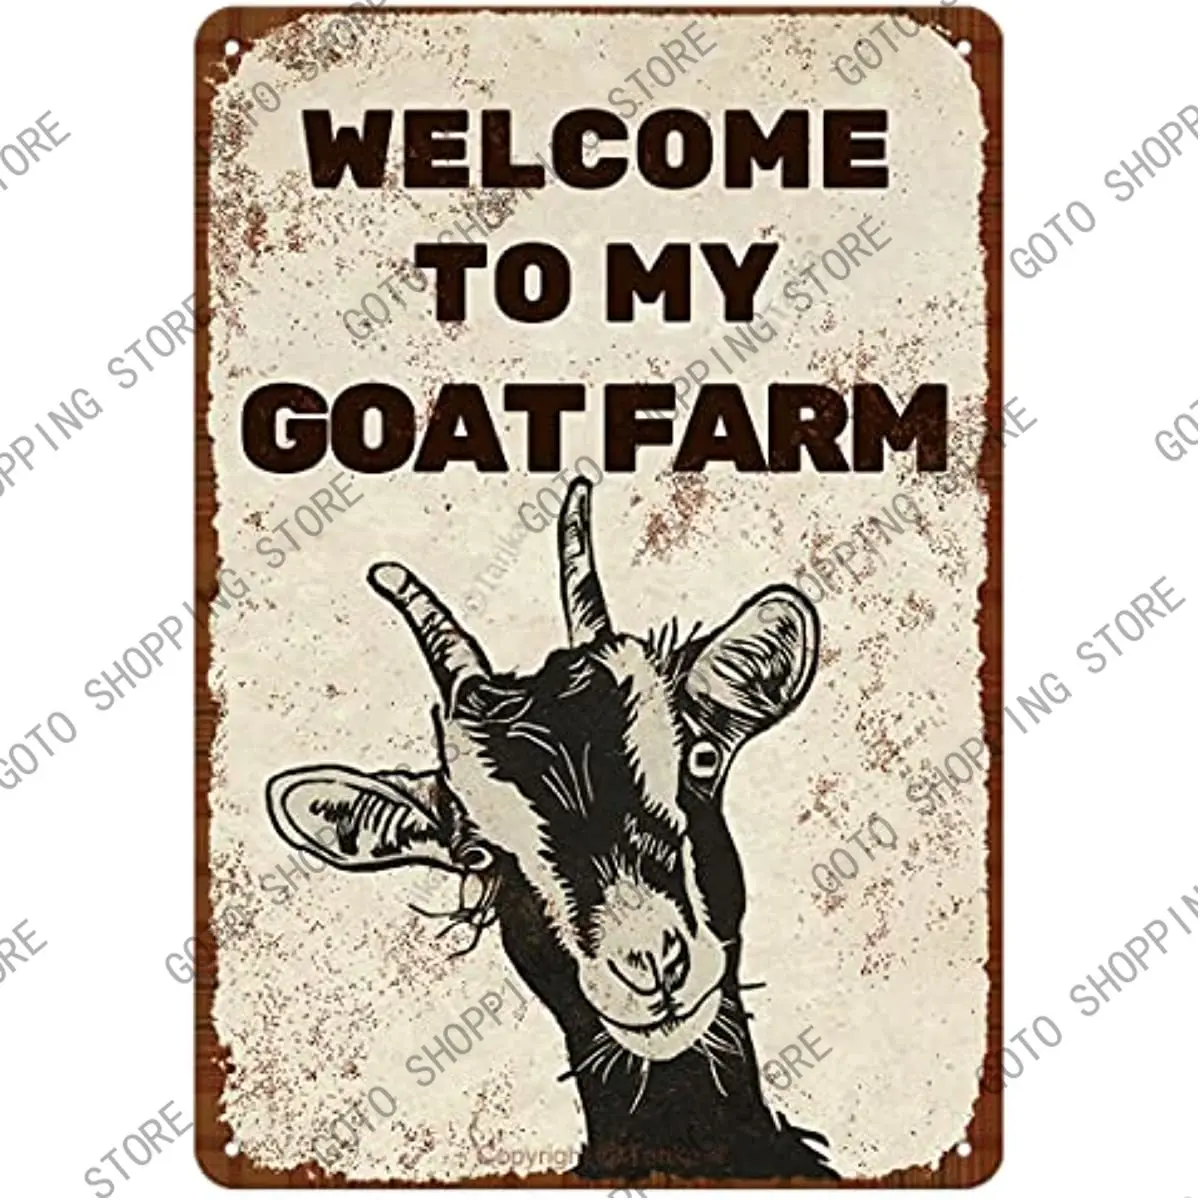 

New Welcome to My Goat Farm Iron Poster Painting Tin Sign Vintage Wall Decor for Cafe Bar Pub Home Beer Decoration Crafts plaque